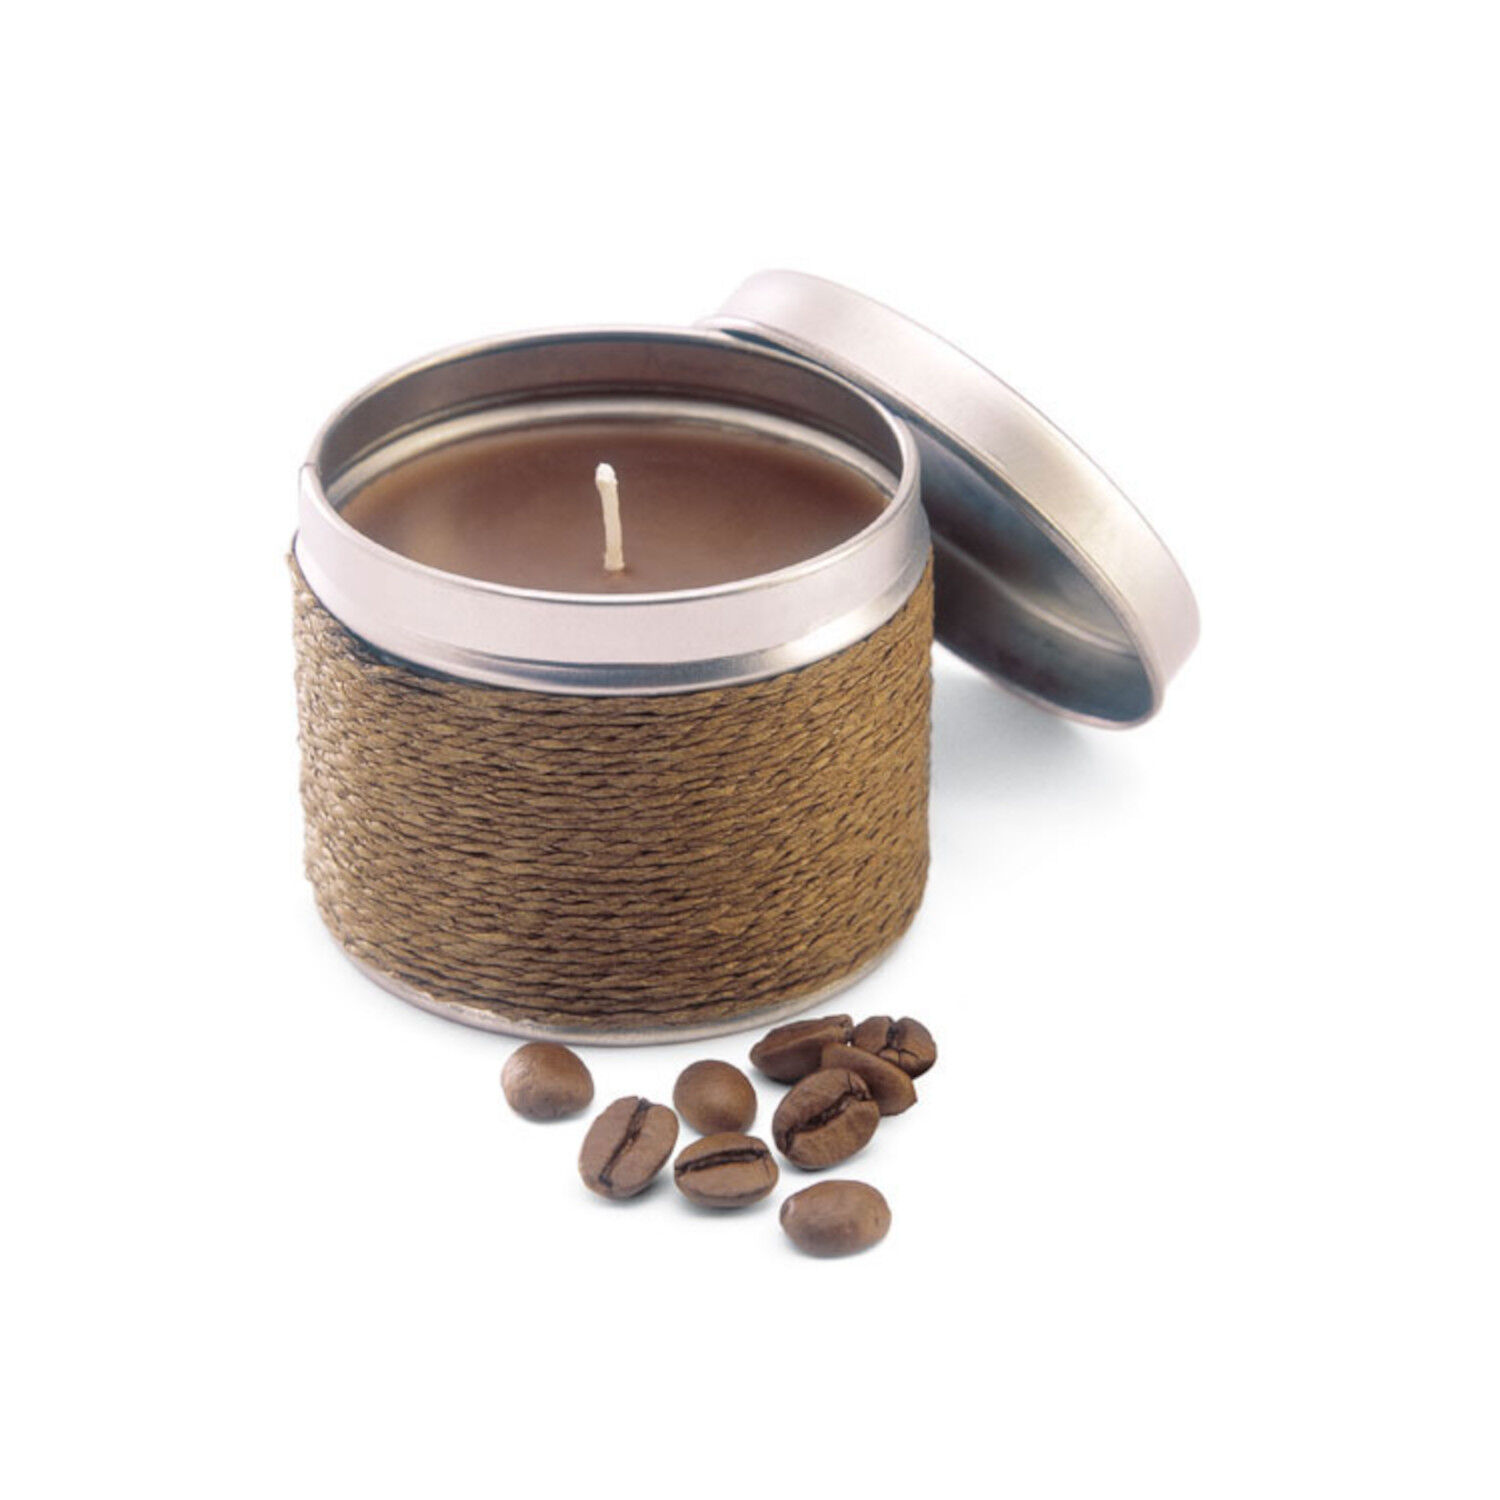 Scented Candle in Colour Matched Tin (coffee)